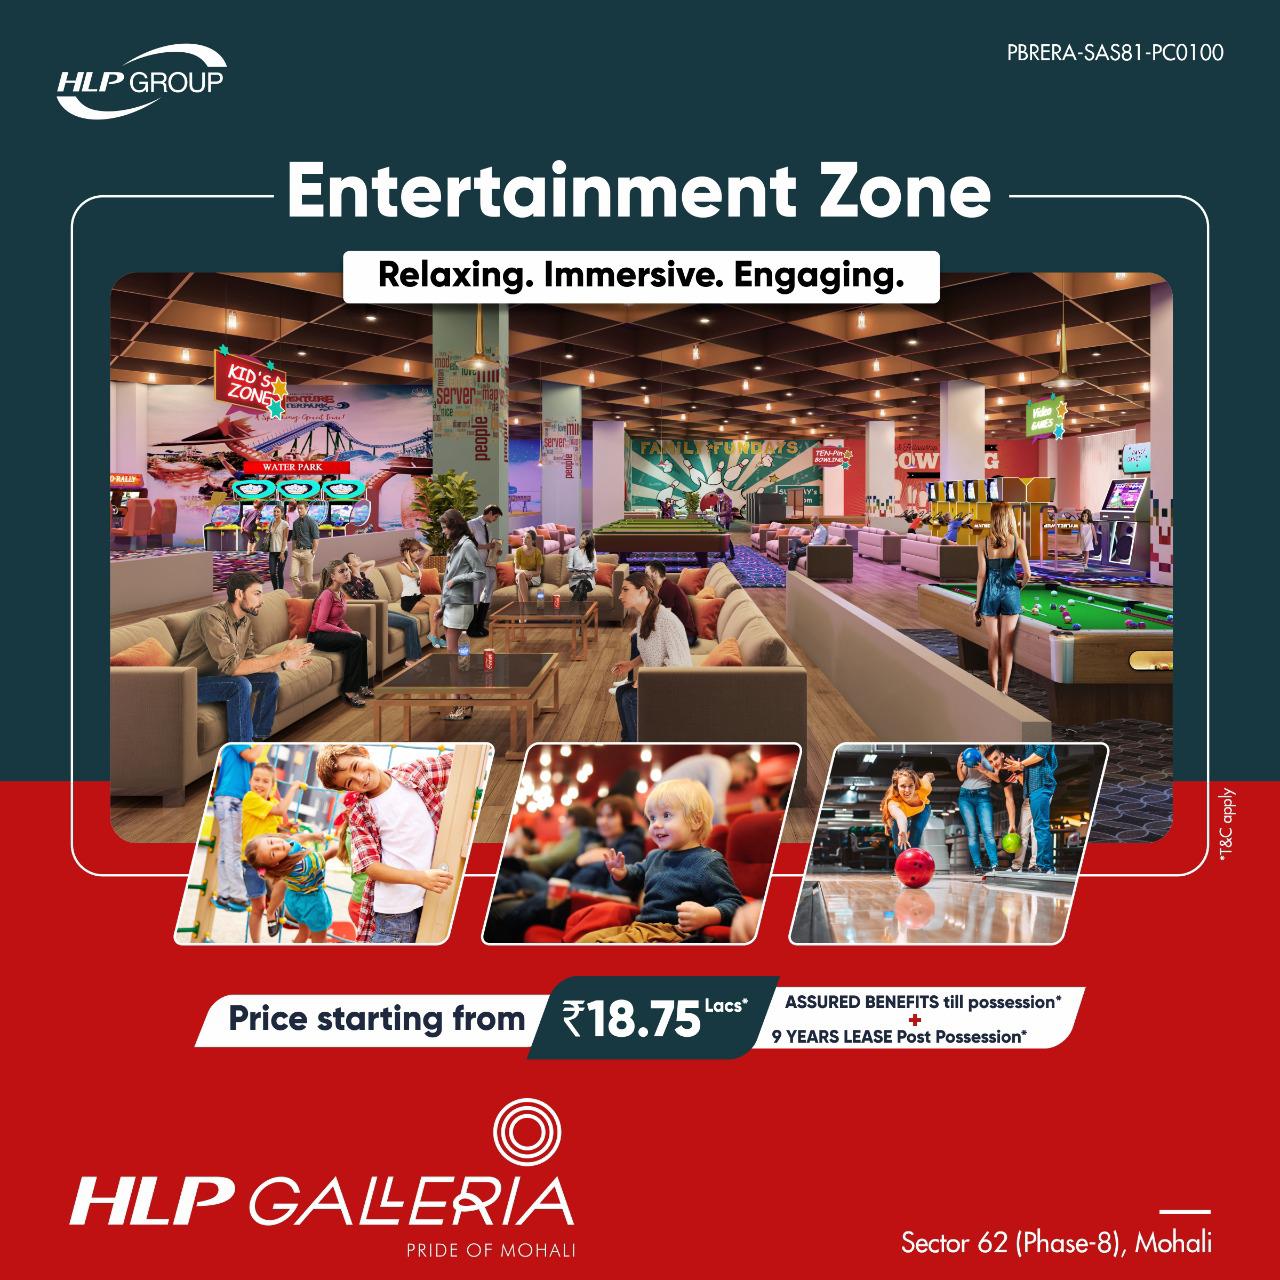 Commercial Property In HLP Galleria Sector 62 Mohali